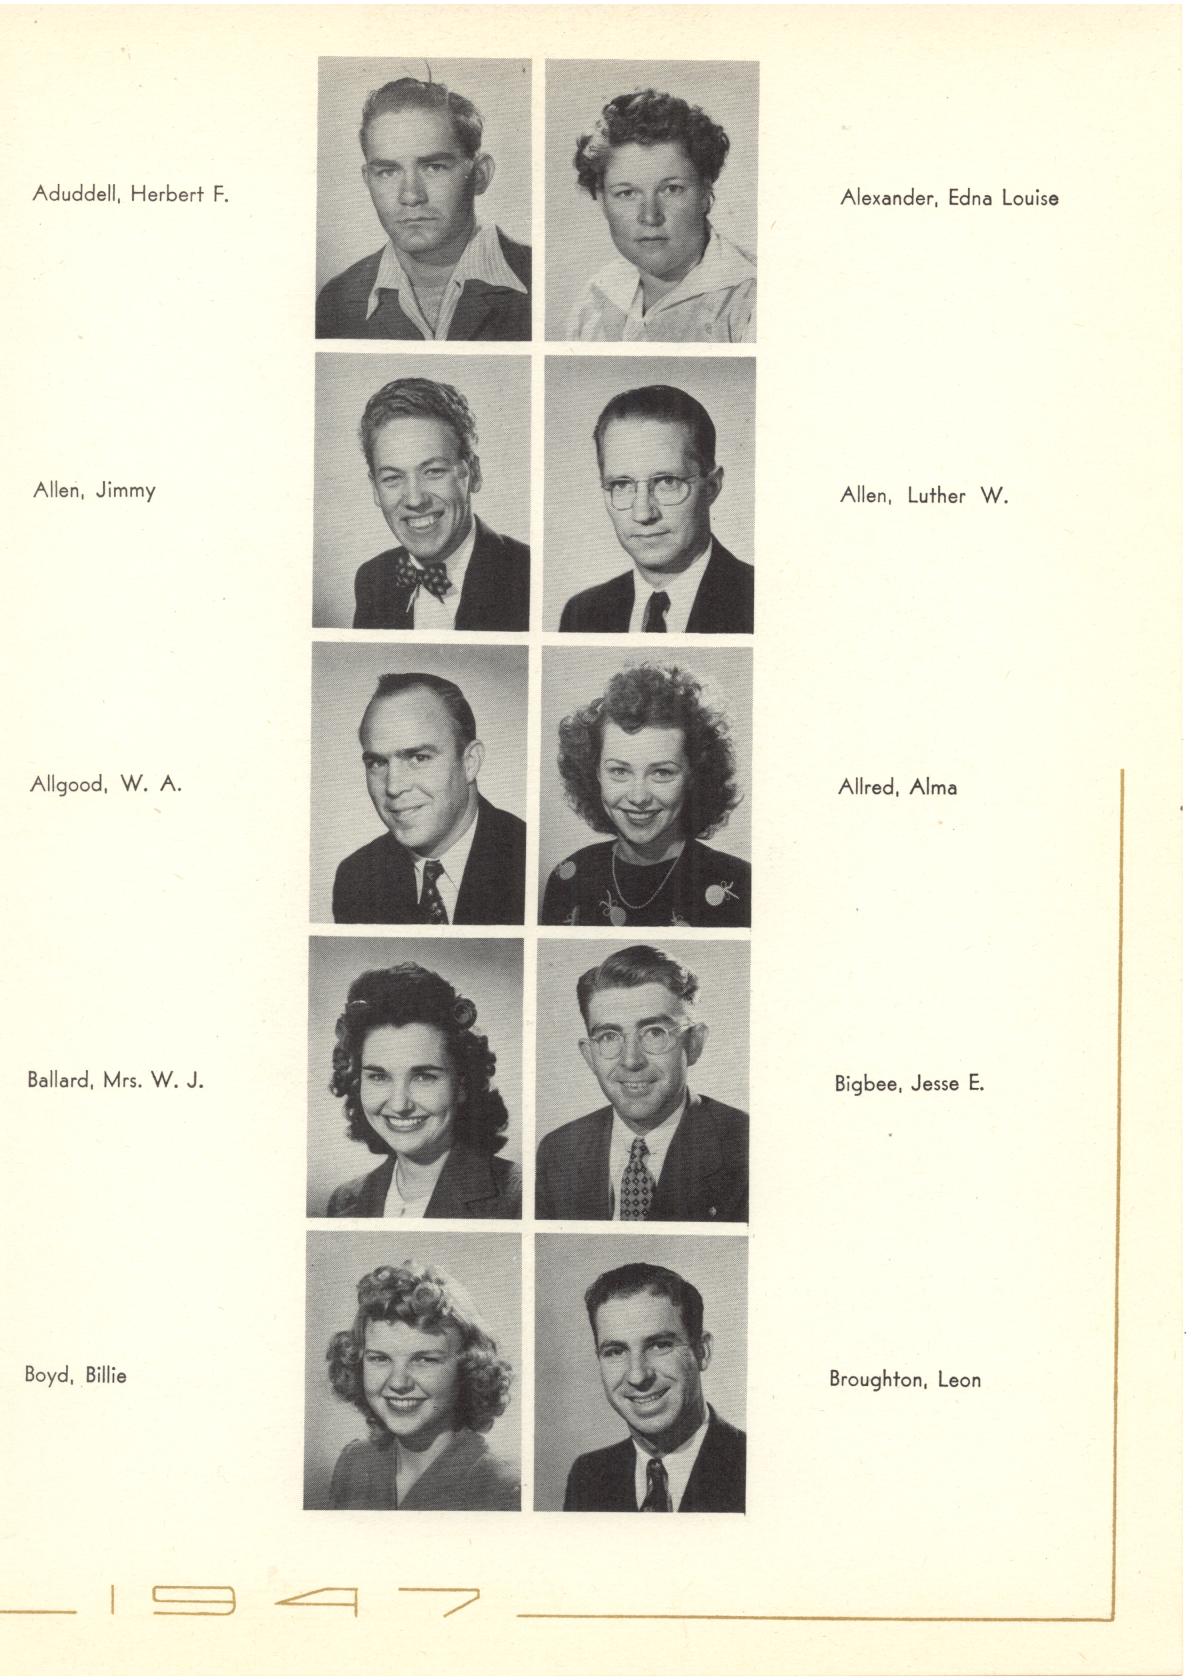 The Lasso, Yearbook of Howard Payne College, 1947
                                                
                                                    87
                                                